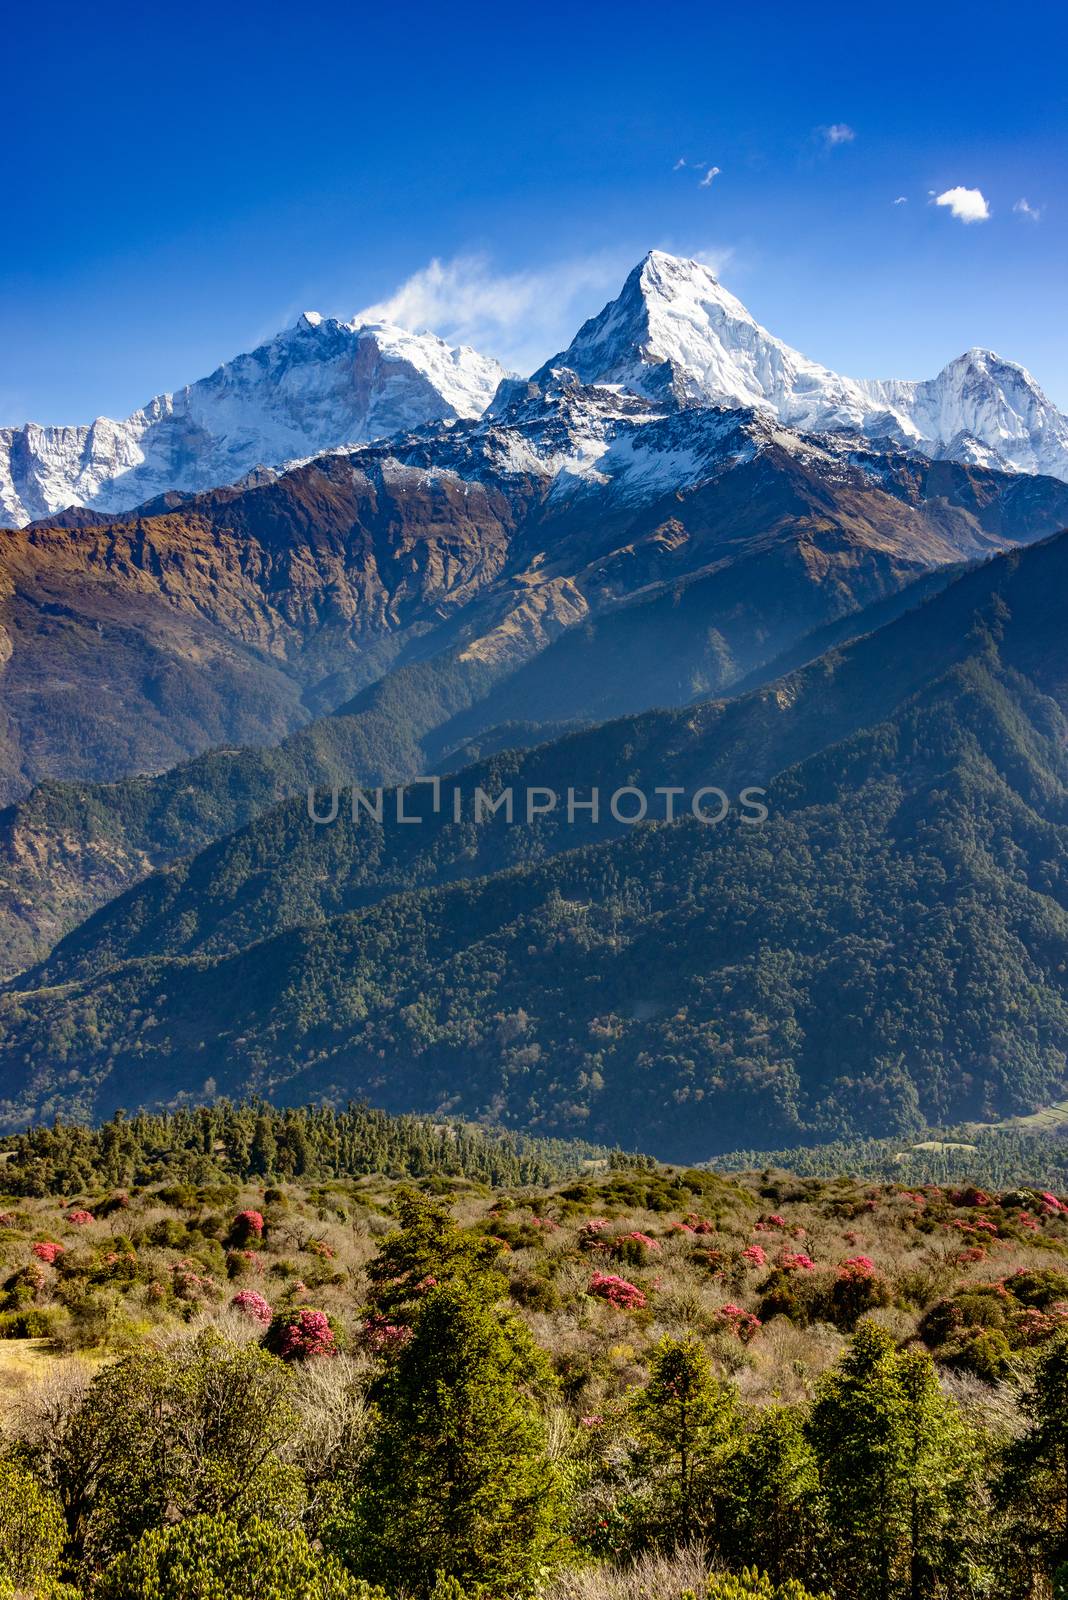 The Annapurna South, rhododendrons in bloom in the foreground, Nepal